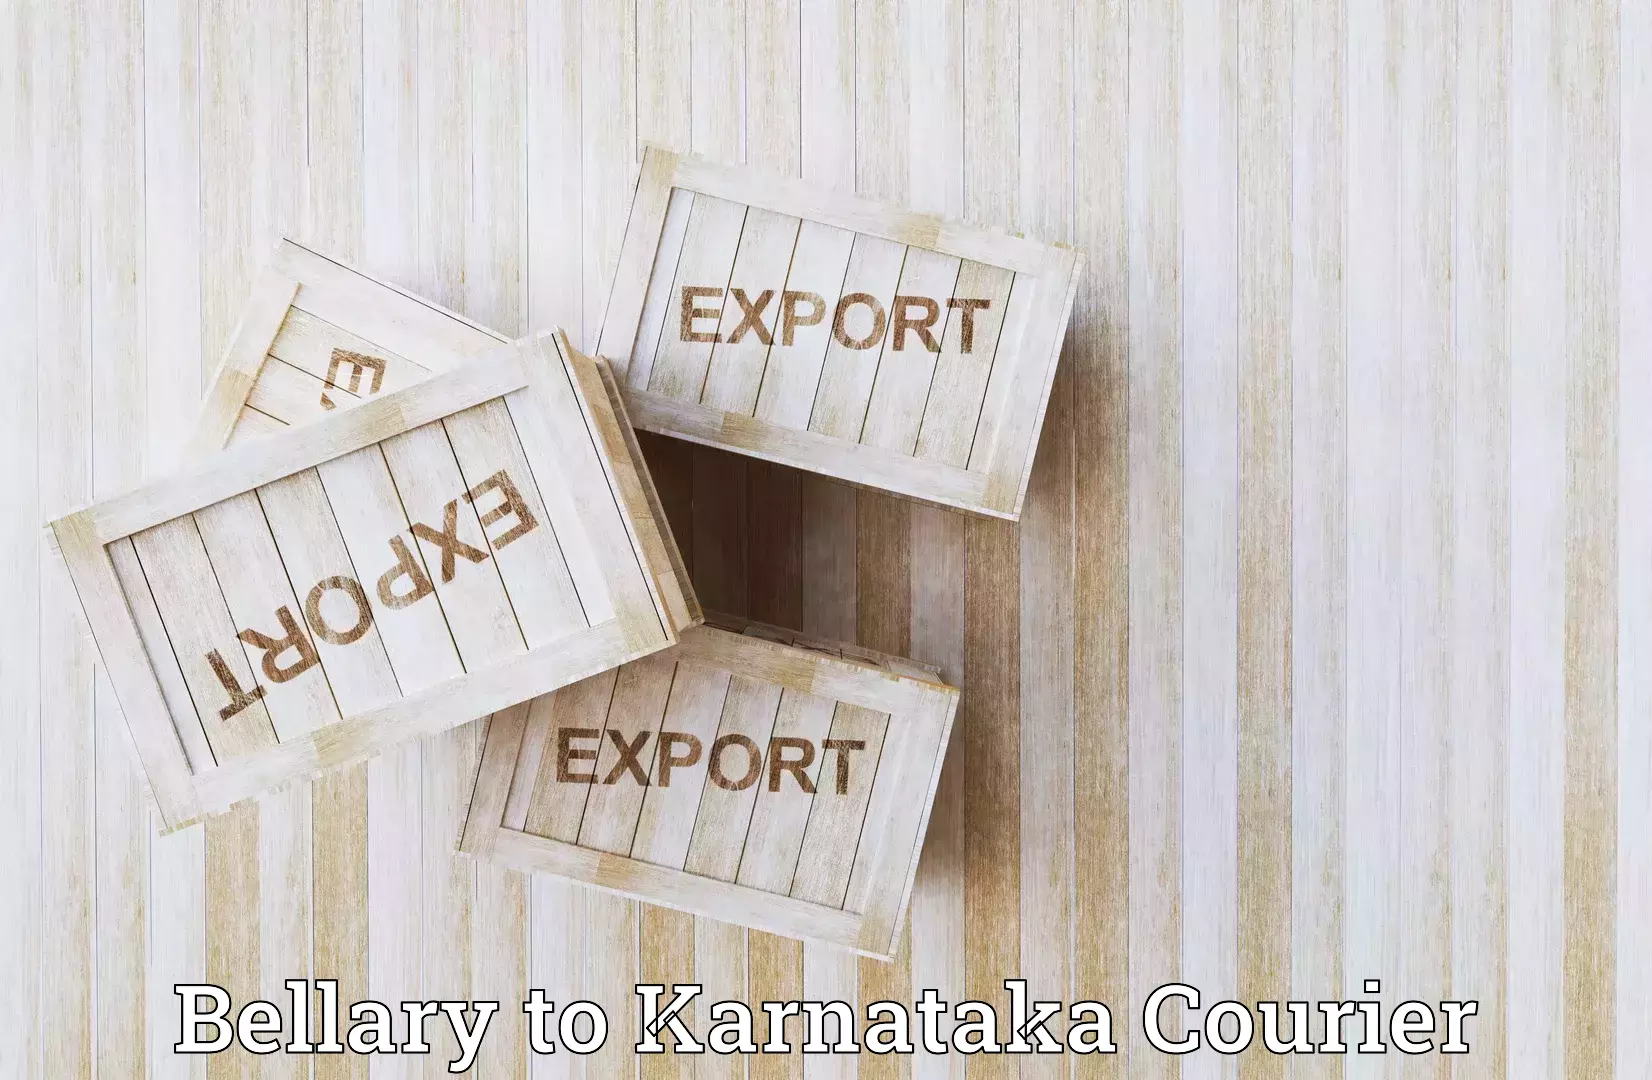 Global courier networks Bellary to Muddebihal